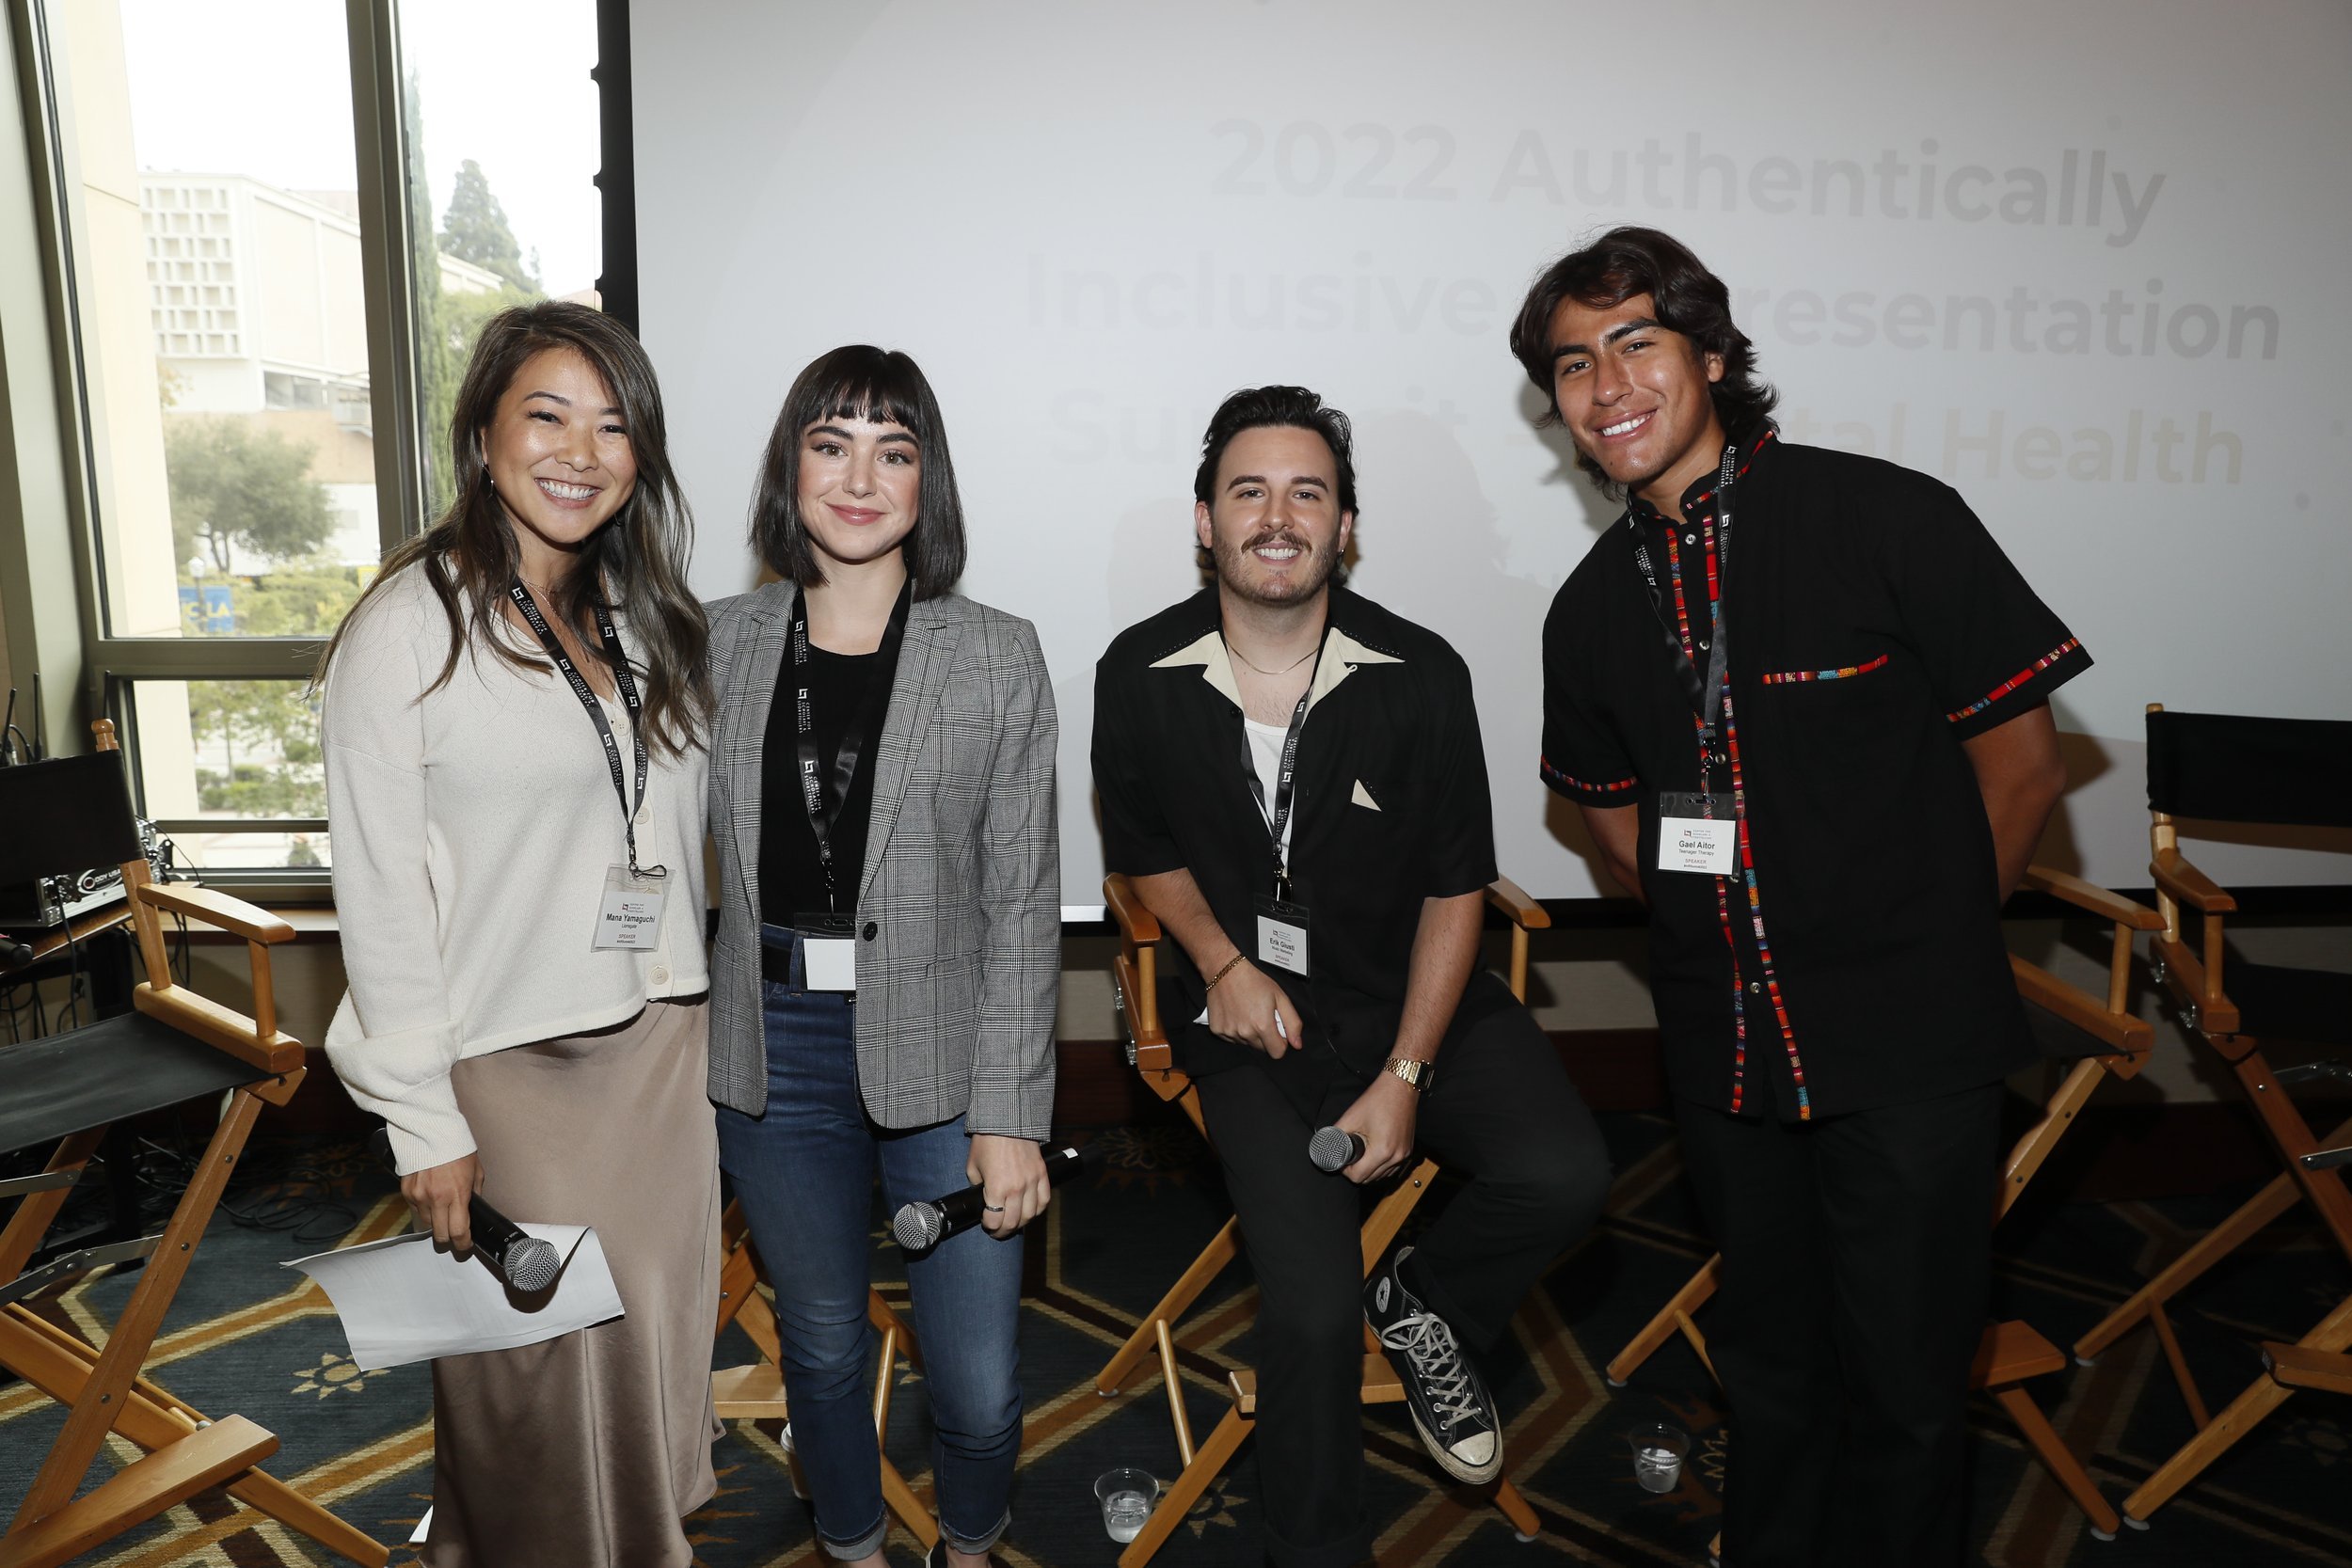  Digital Resources That Connect With Youth panelists - Mana Yamaguchi (Lionsgate), Sarah Gilman (Actress, Writer, Activist), Erik Giusti (Music Marketing Expert), and Gael Aitor (Teenager Therapy Podcast) 